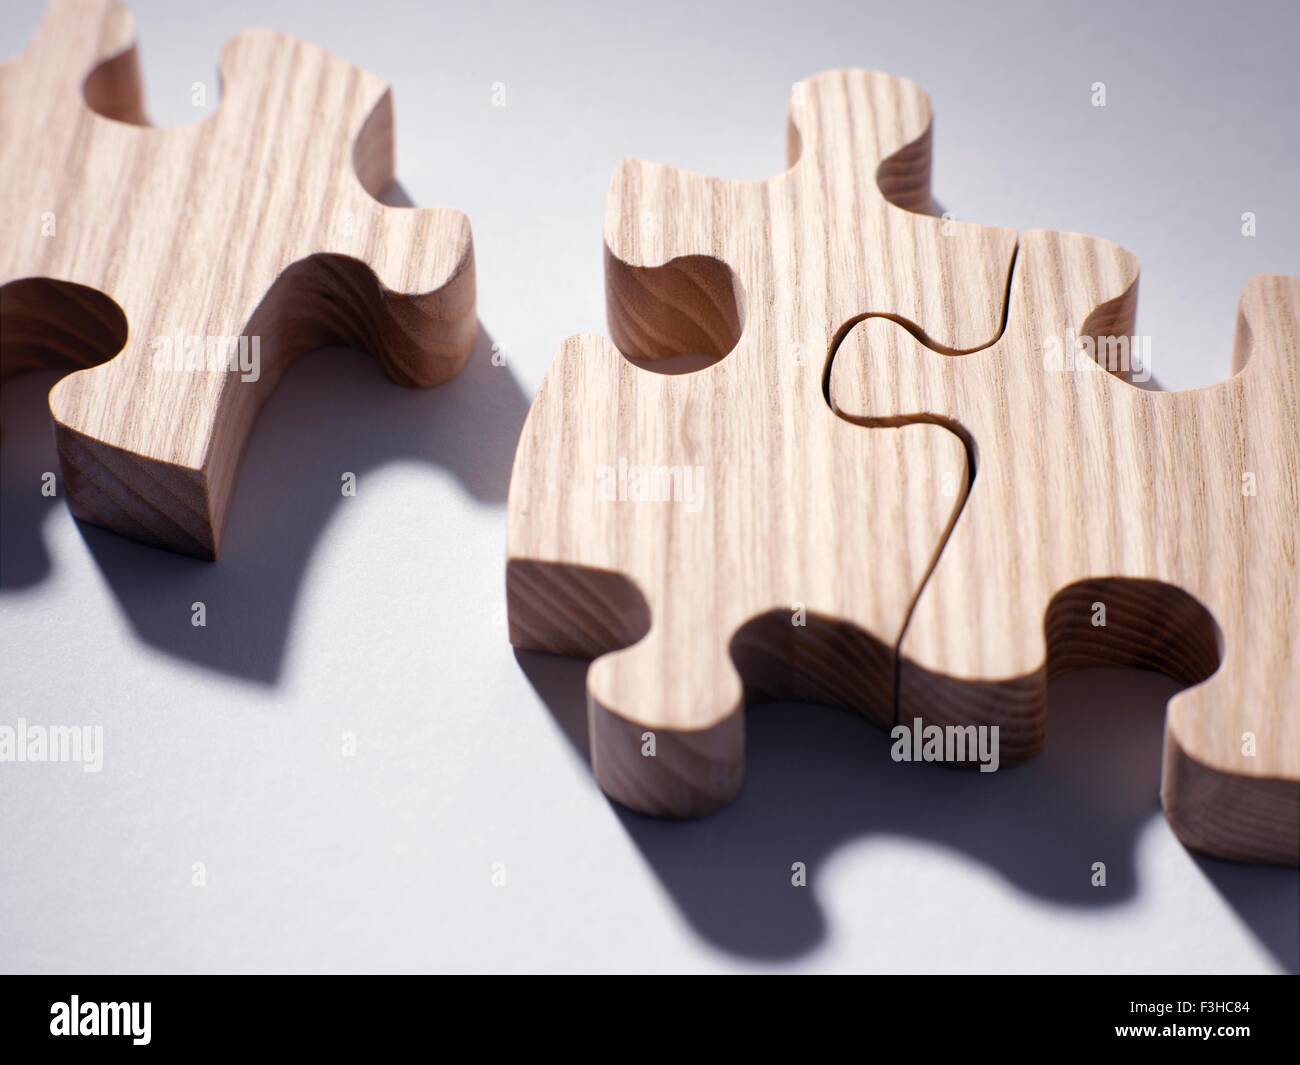 Wooden jigsaw pieces Stock Photo